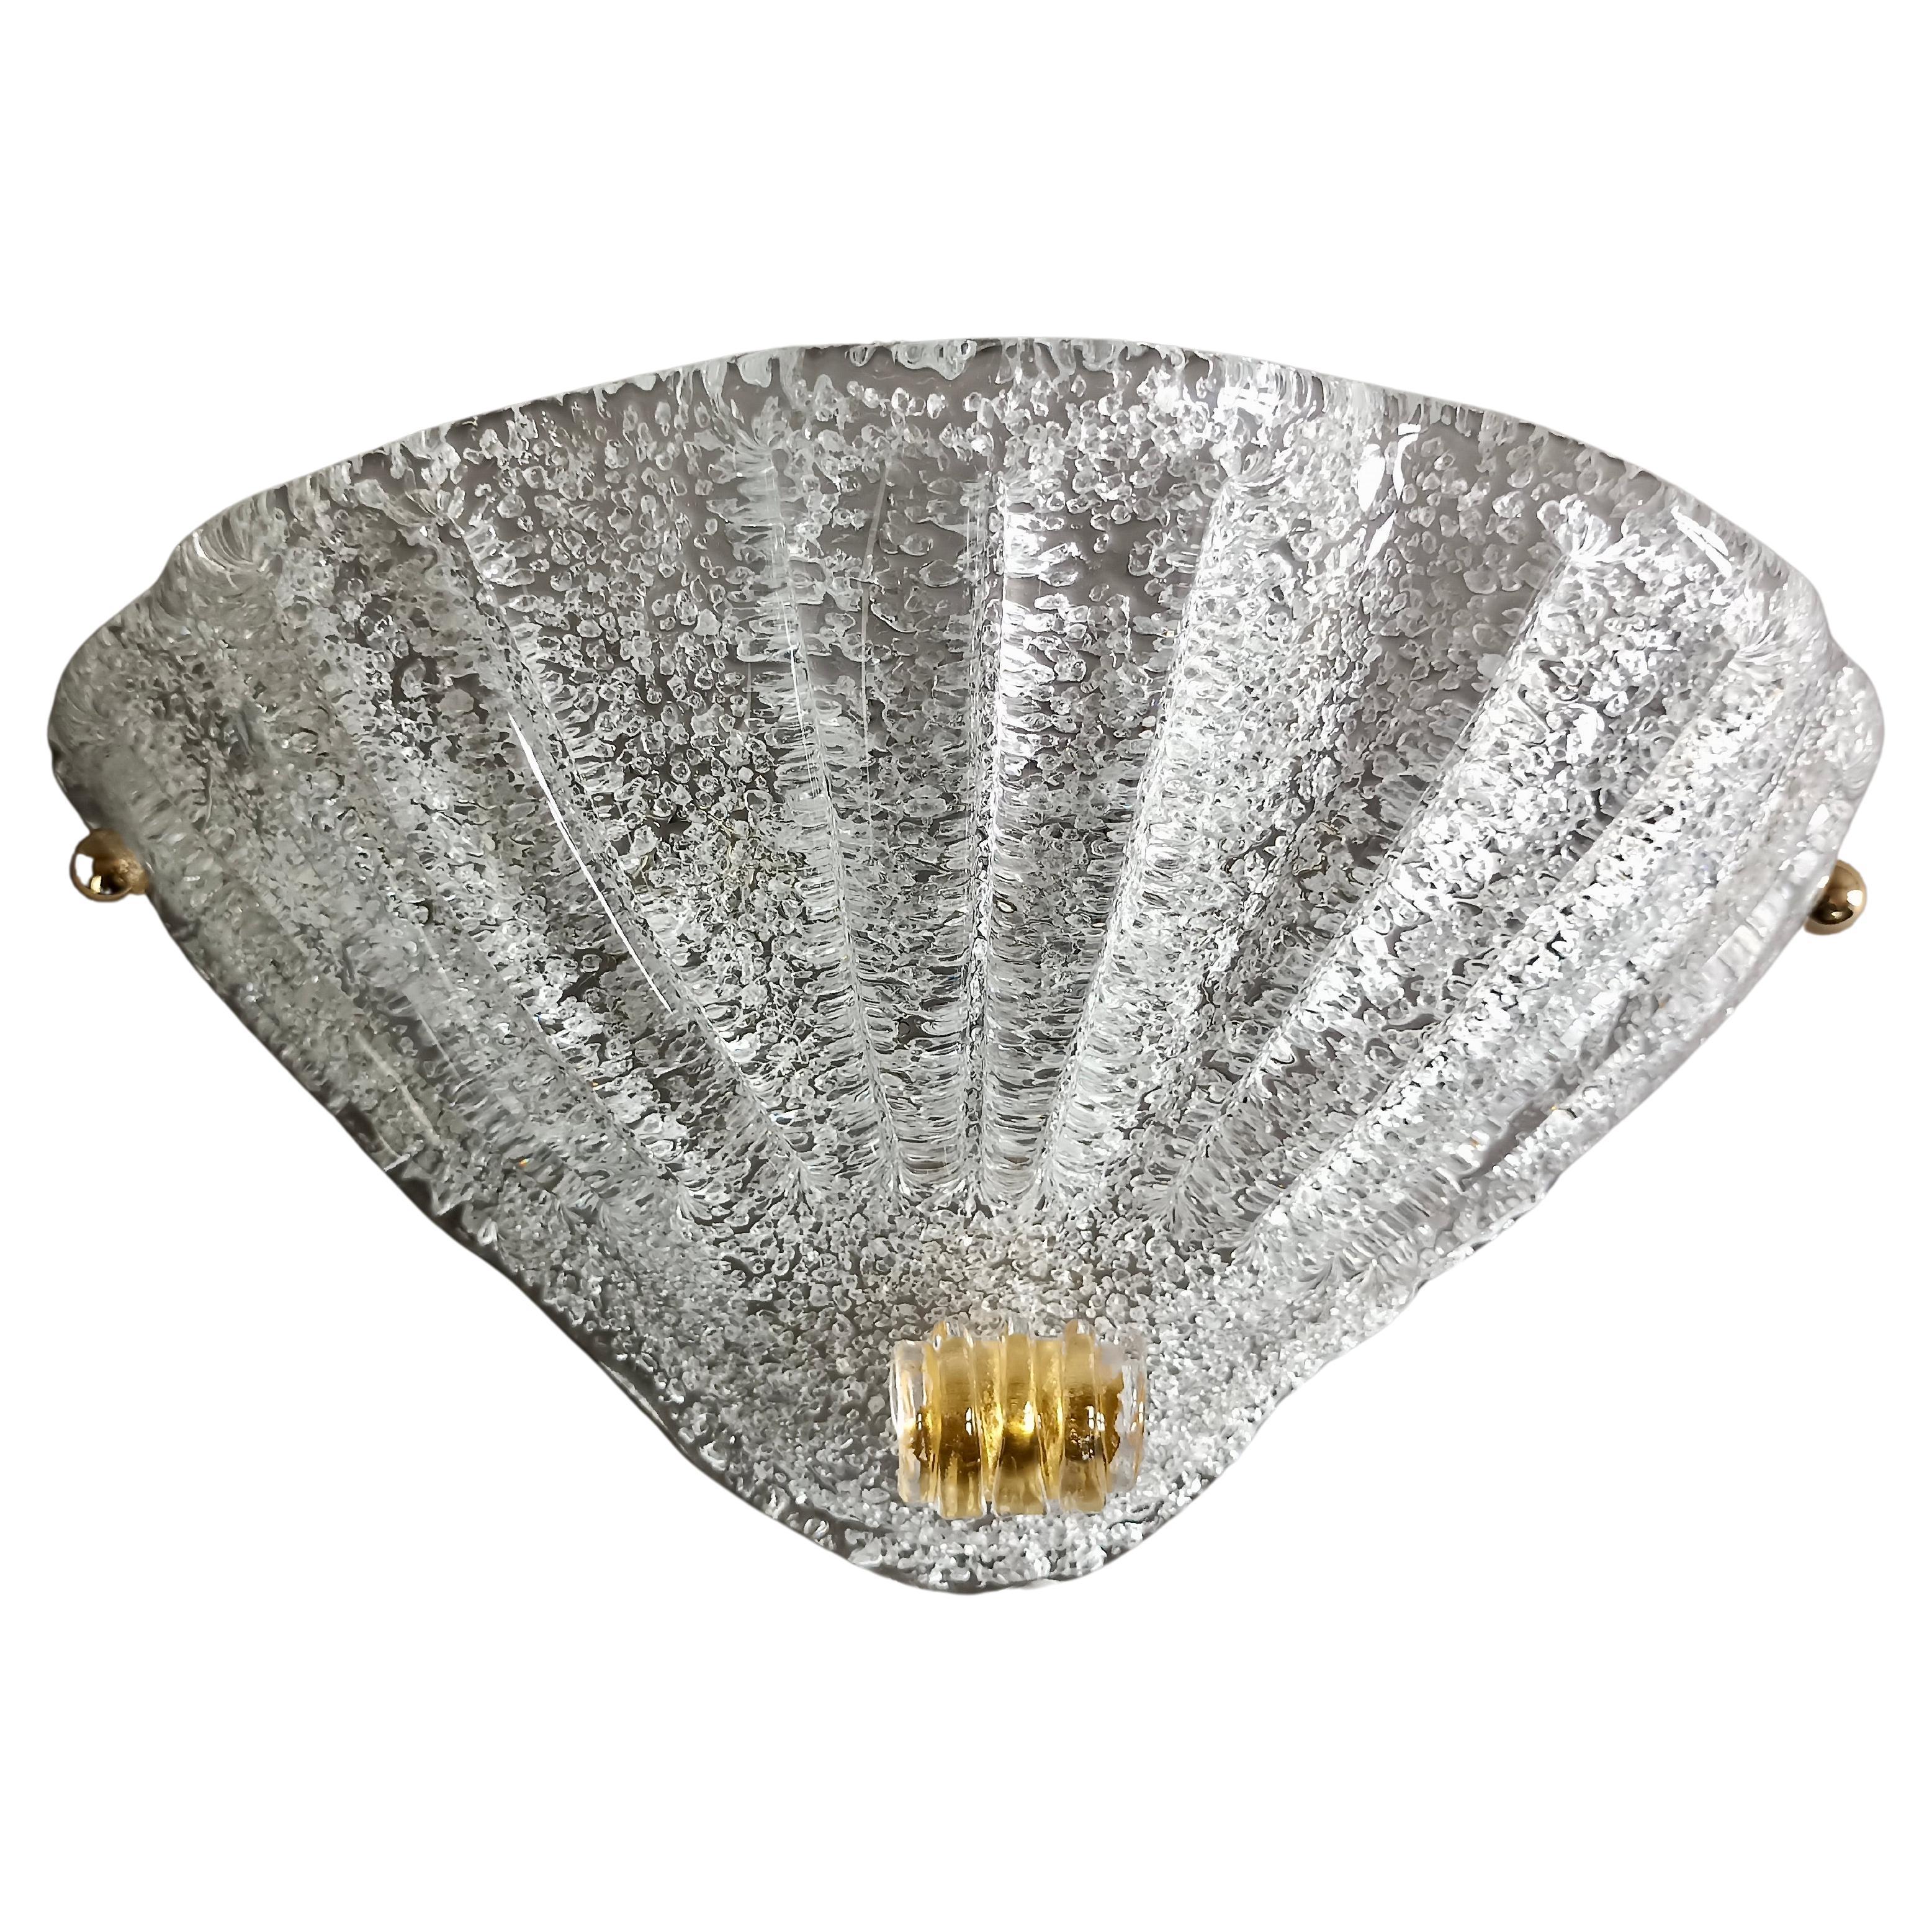 Set of two beautiful sconces from the 1980s, in thick clear Murano glass with a stupendous ribbed workmanship made by hand. 
The surface of the lampshades is smooth glass, while the lower part is made rough by the hot application of minute fragments